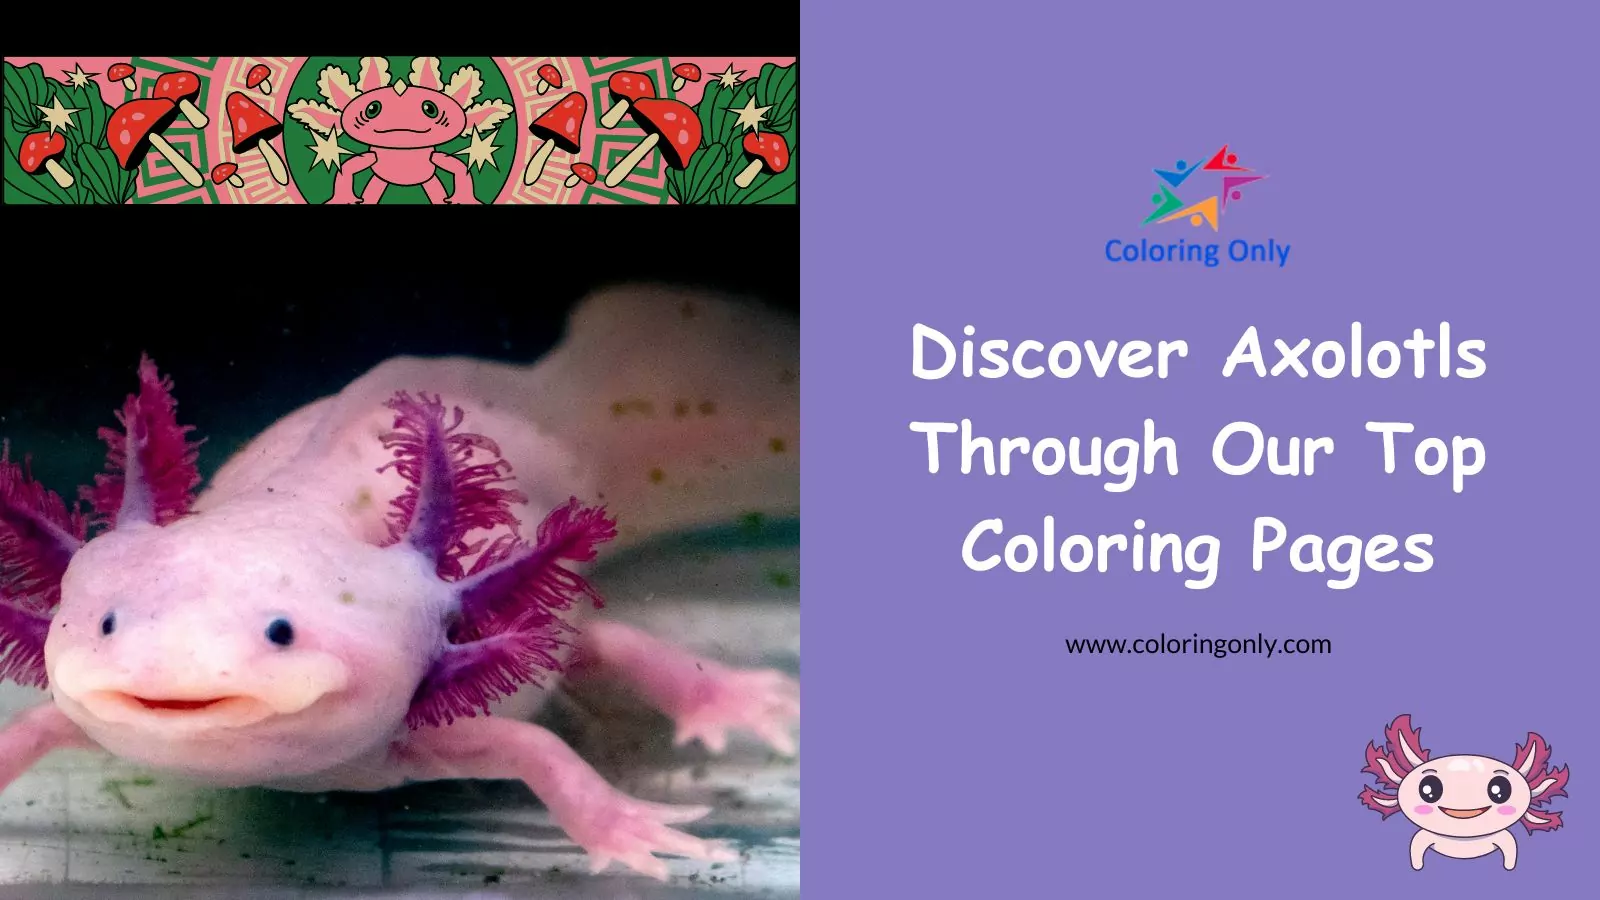 Discover Axolotls Through Our Top Coloring Pages